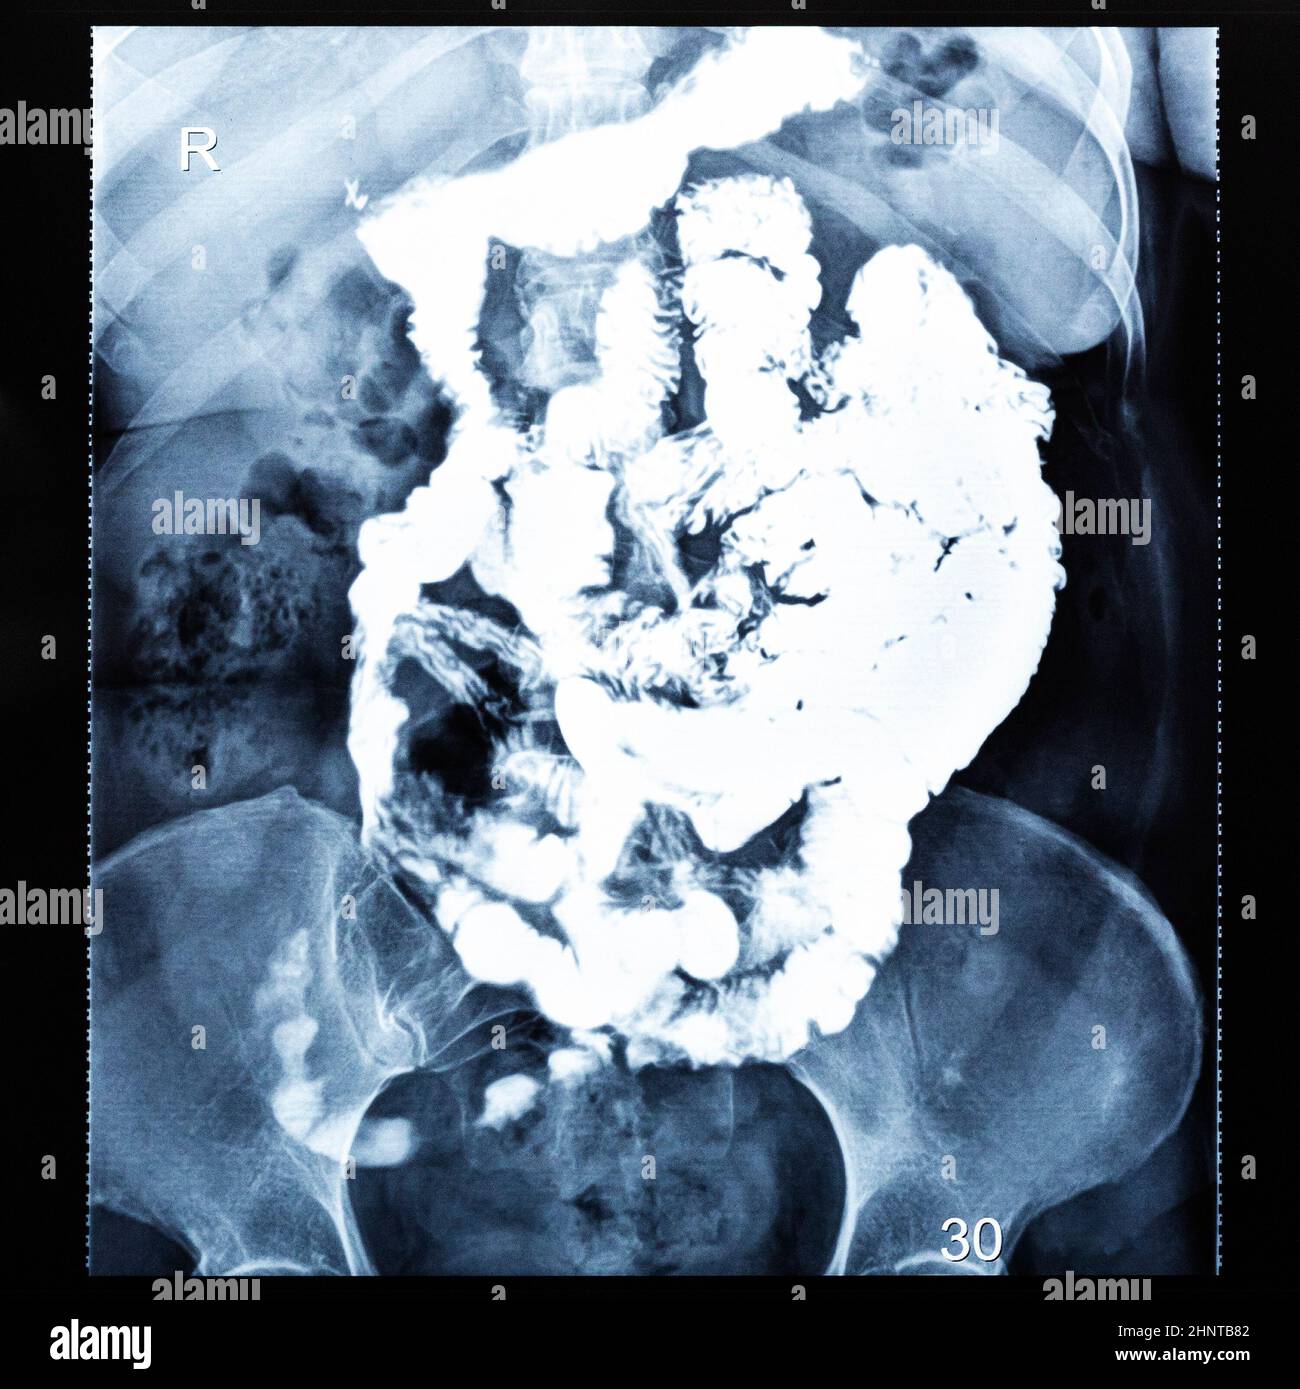 Barium study of small bowel after thirty minutes Stock Photo